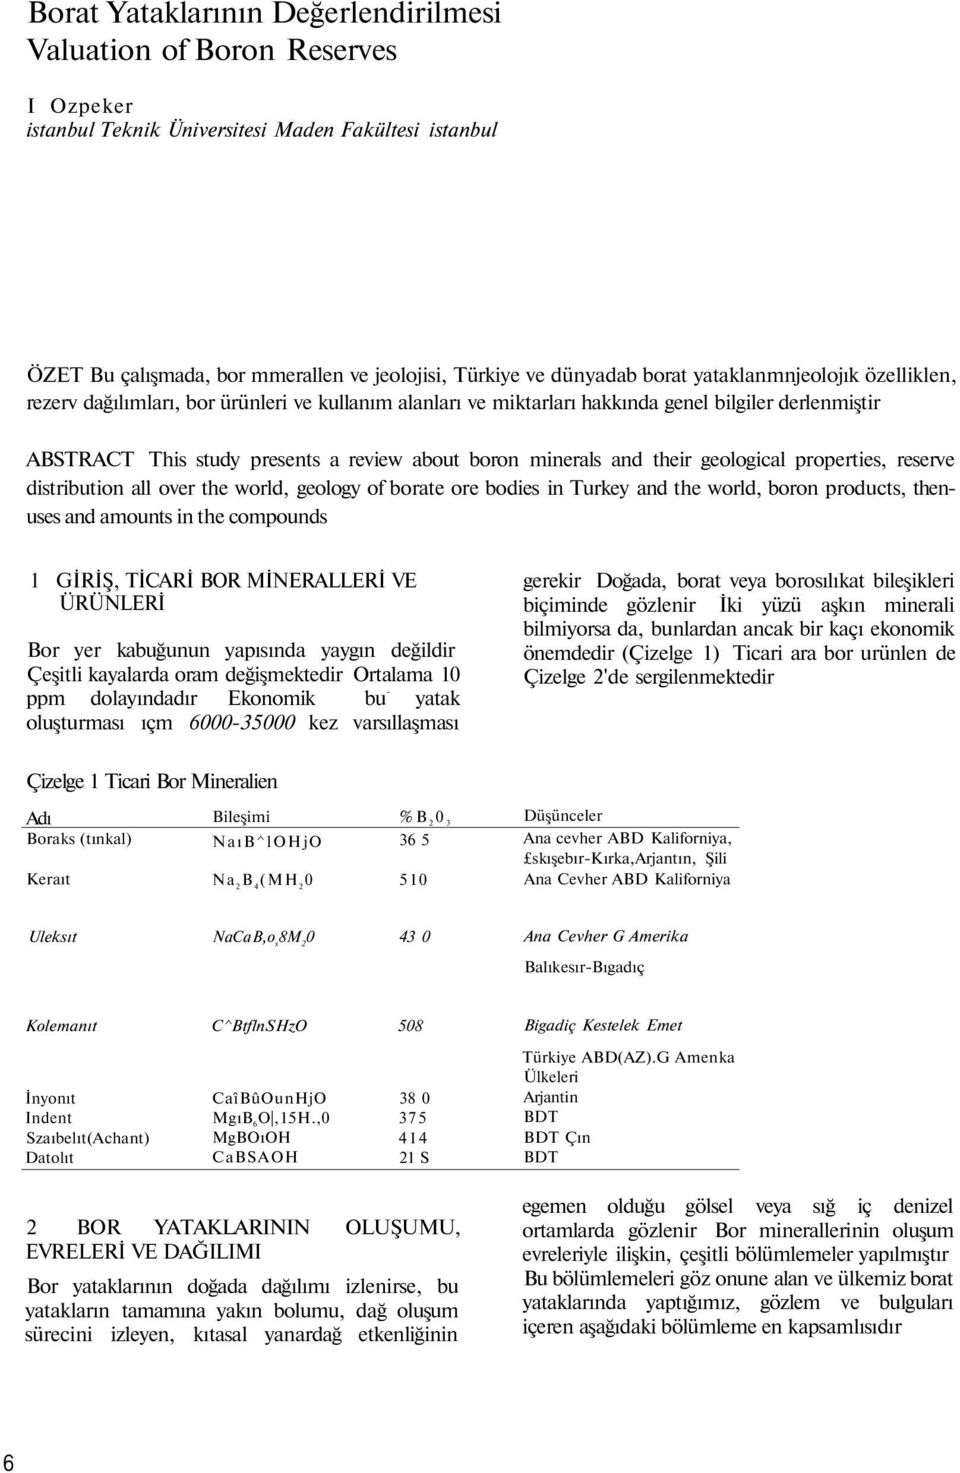 minerals and their geological properties, reserve distribution all over the world, geology of borate ore bodies in Turkey and the world, boron products, thenuses and amounts in the compounds 1 GİRİŞ,